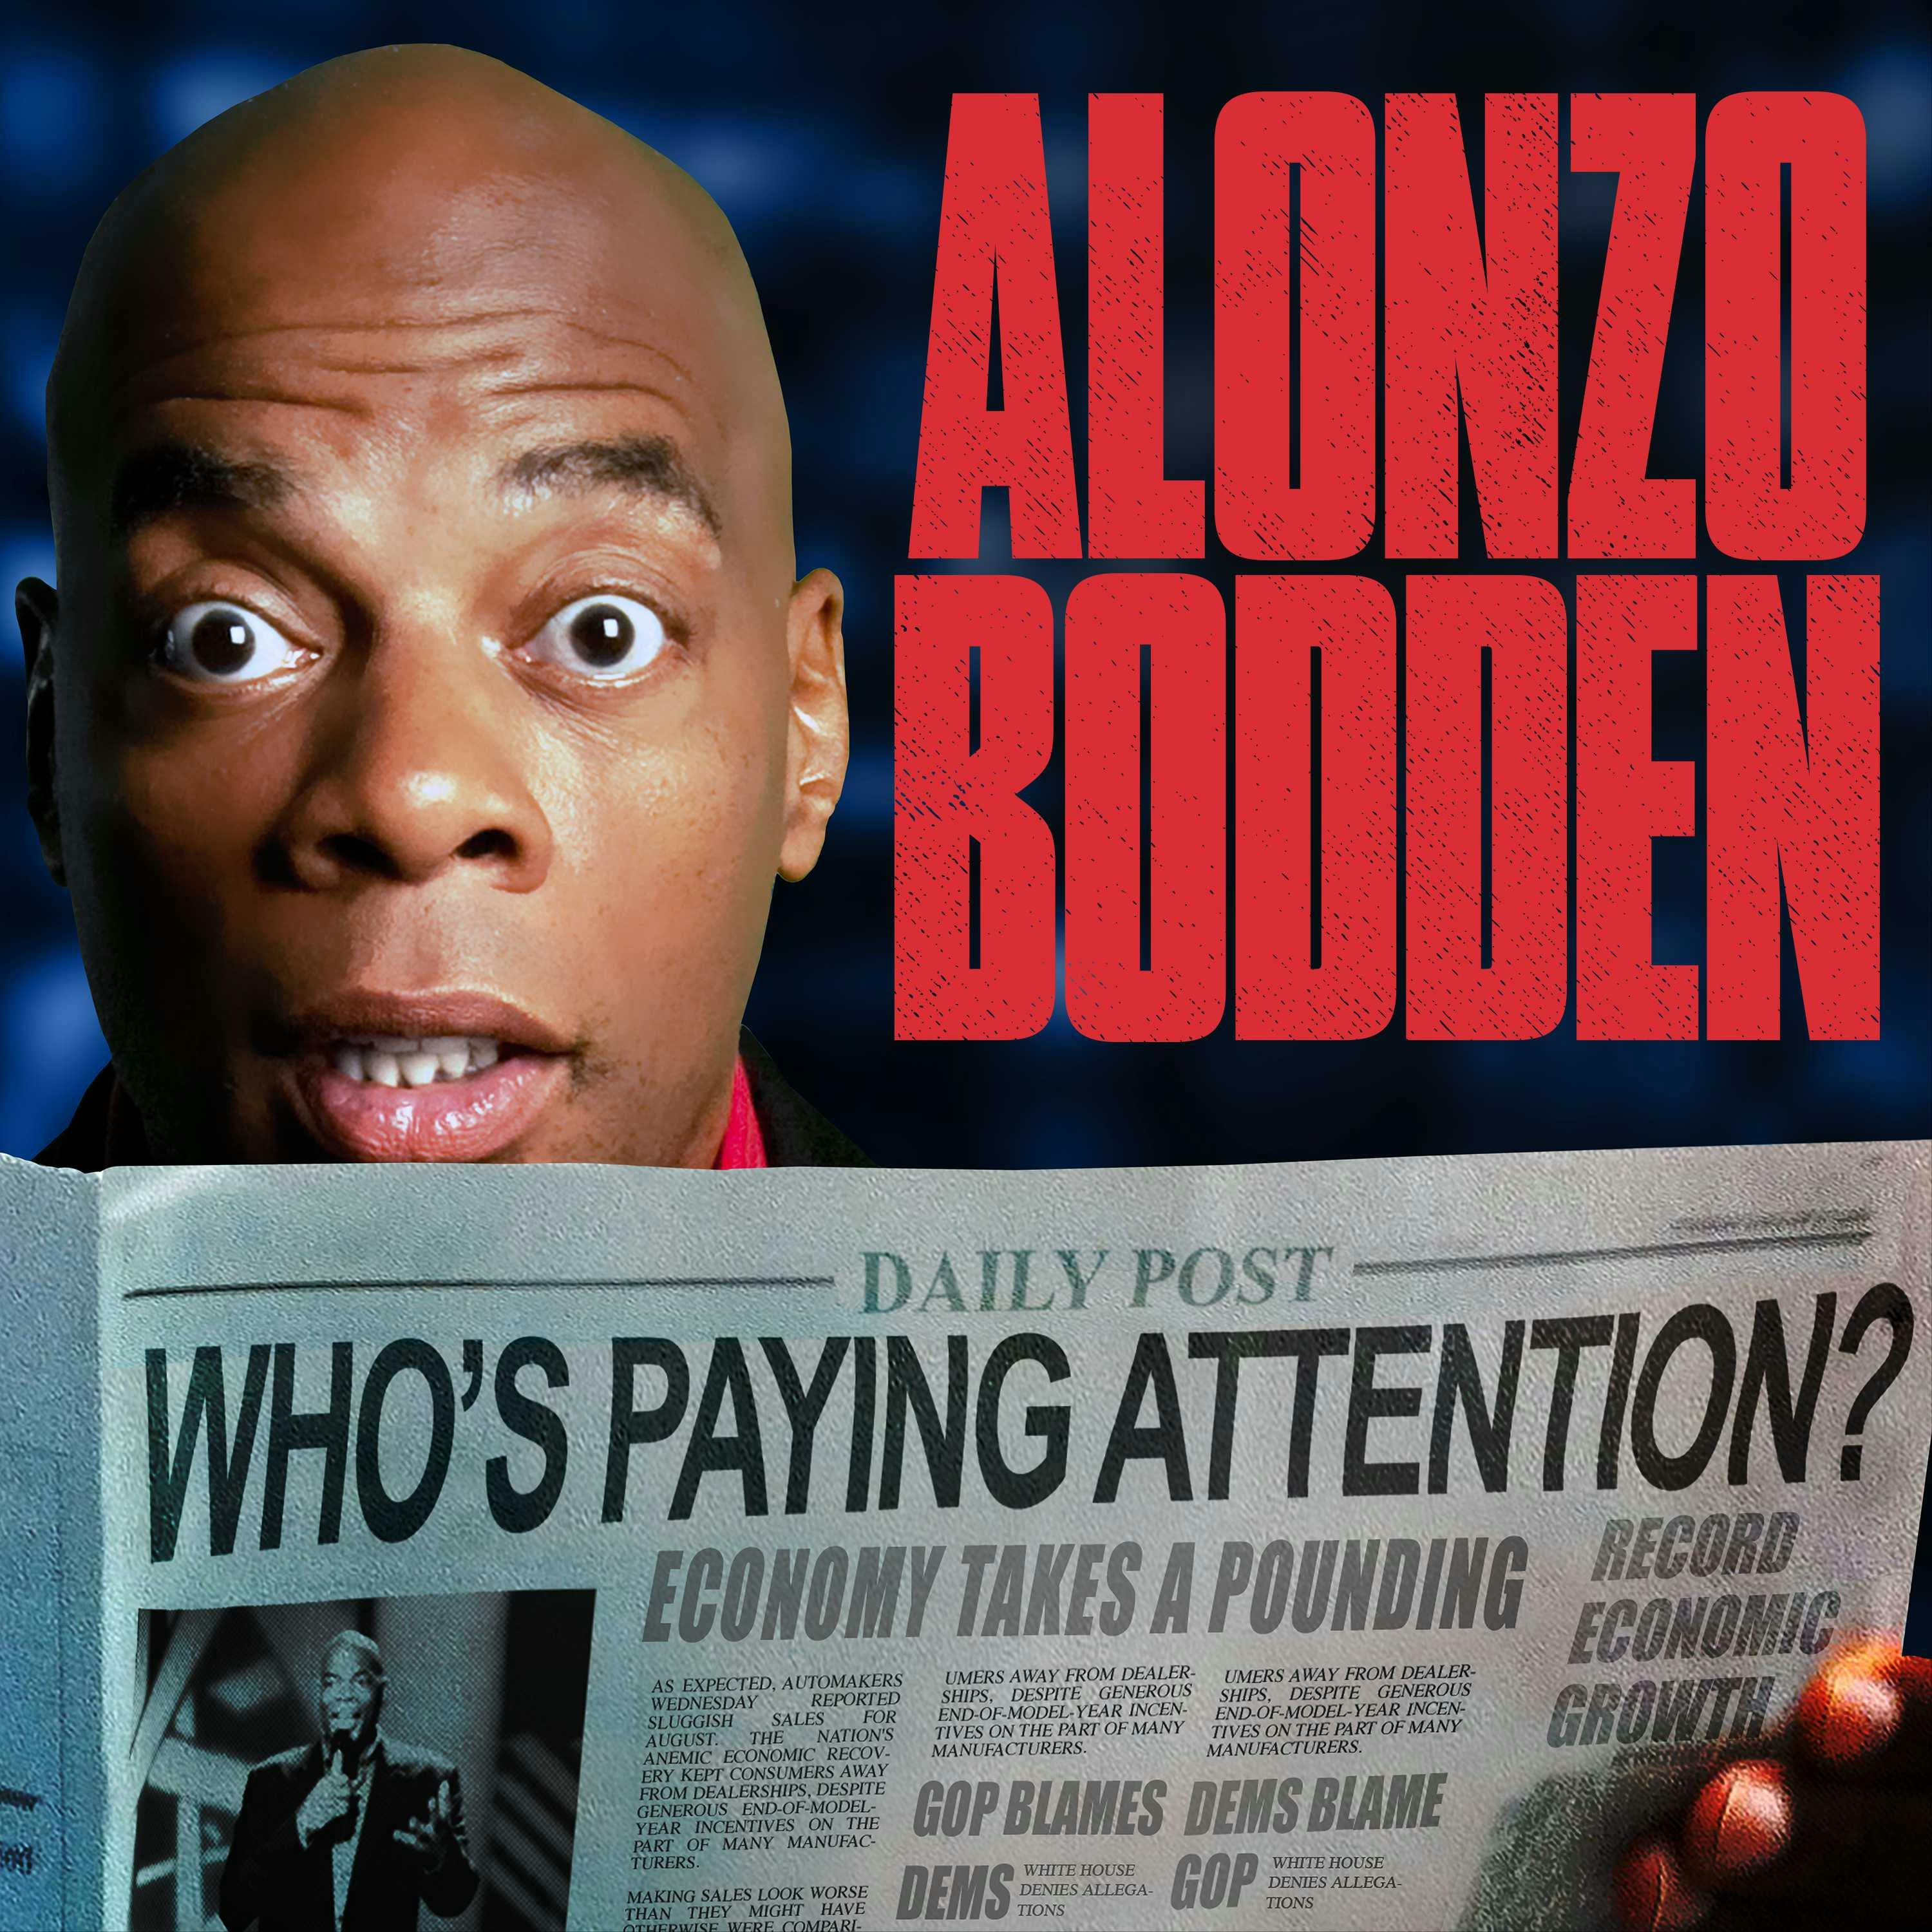 Alonzo Bodden: Who's Paying Attention - Alonzo Bodden